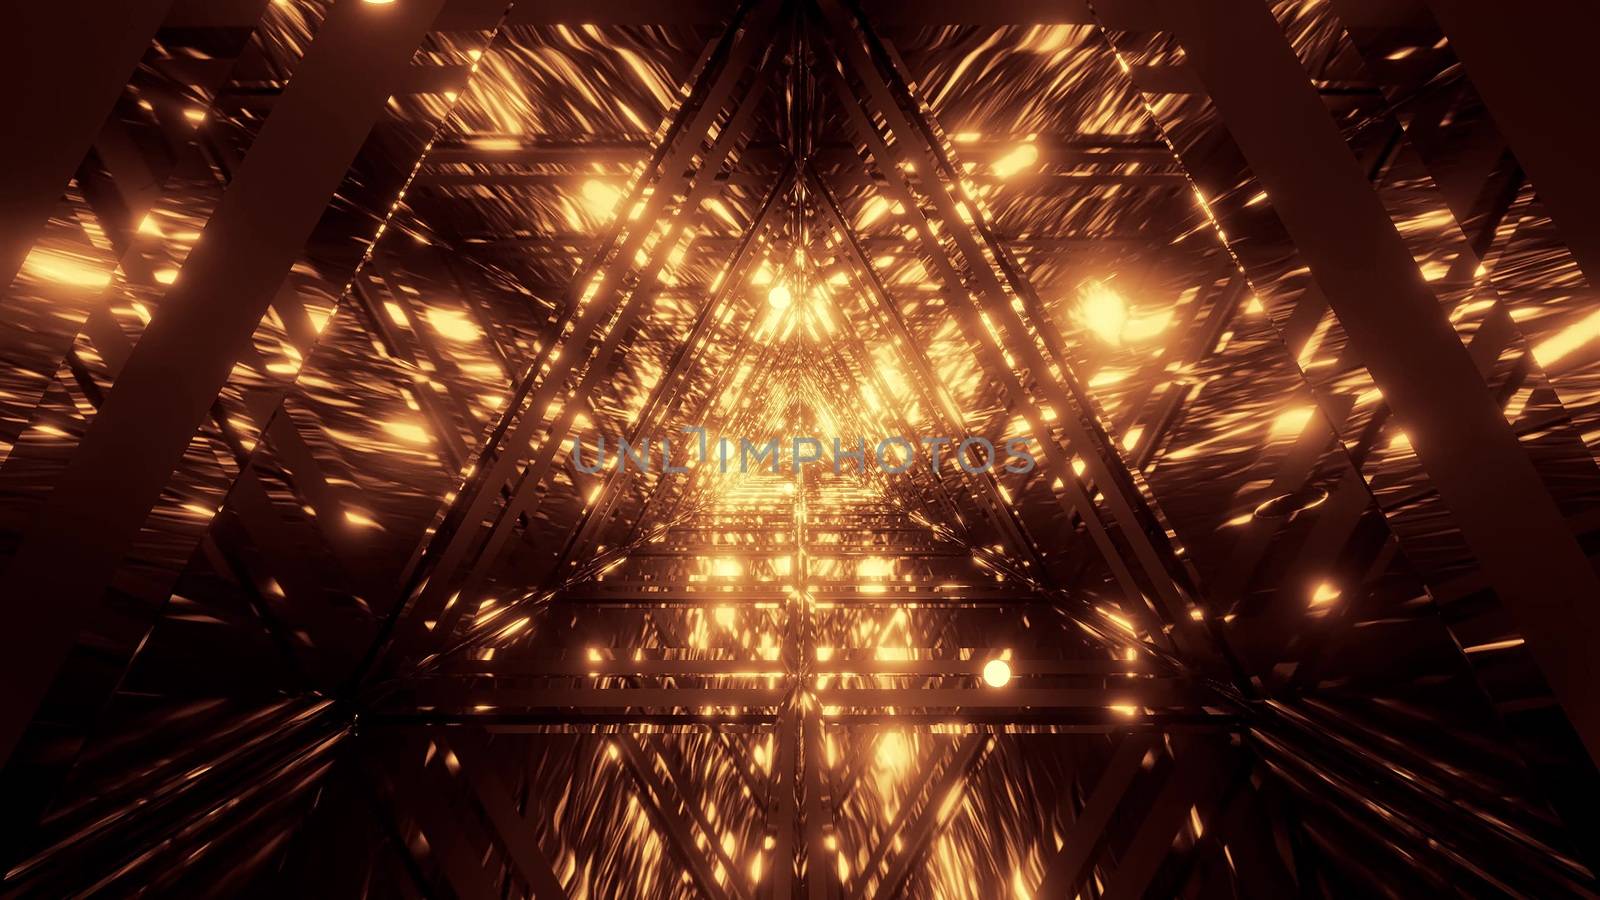 abstract galaxy reflection triangle glass tunnel design with flying glowiong spheres particles 3d illustration wallpaper background by tunnelmotions